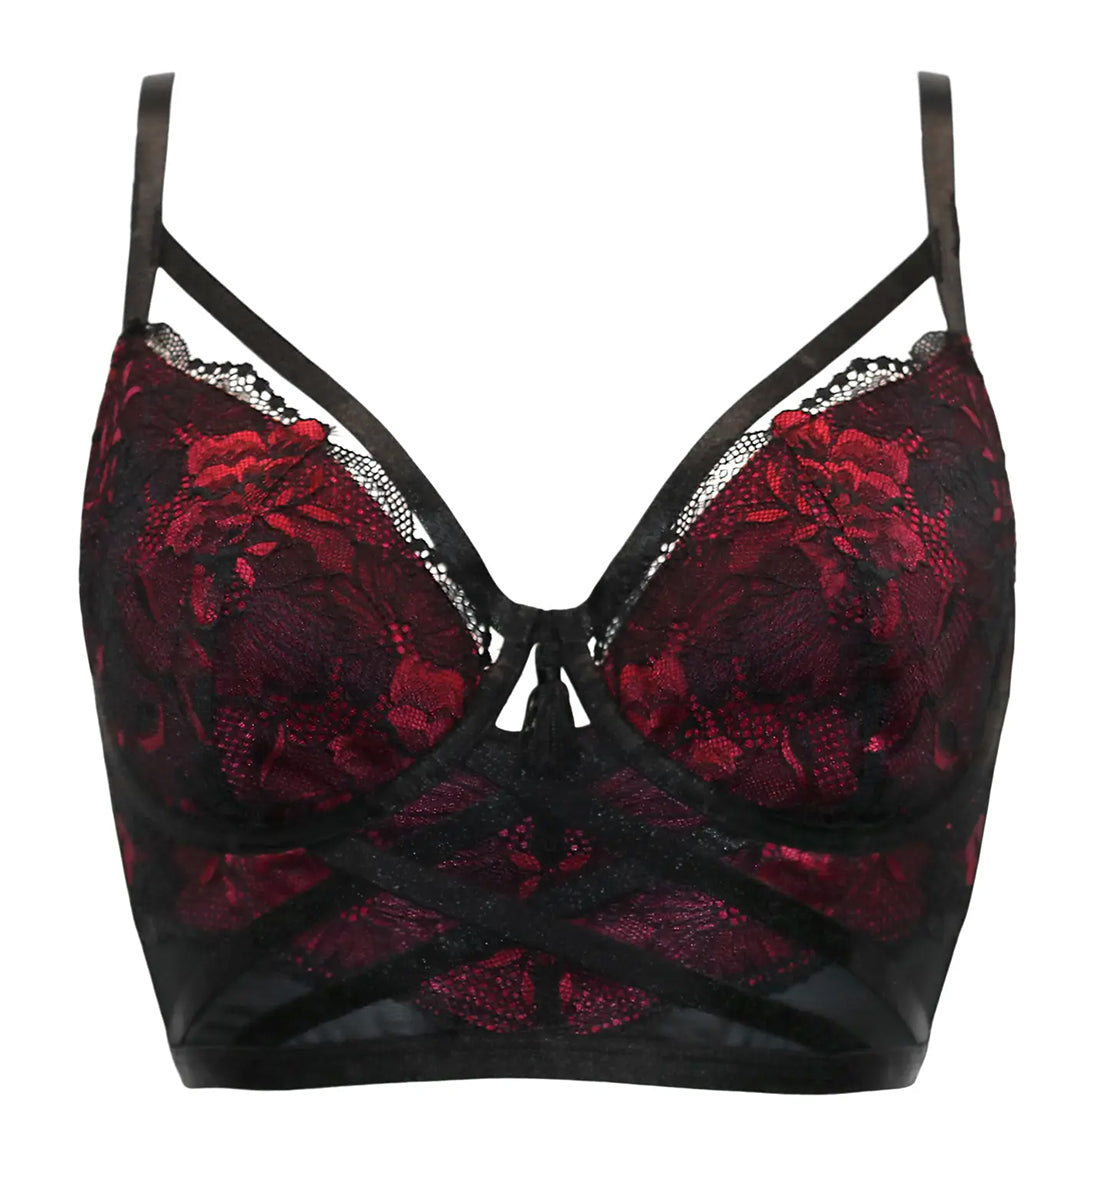 Pour Moi After Hours Padded Longline Underwire Bra (27501),32D,Red/Black - Red/Black,32D